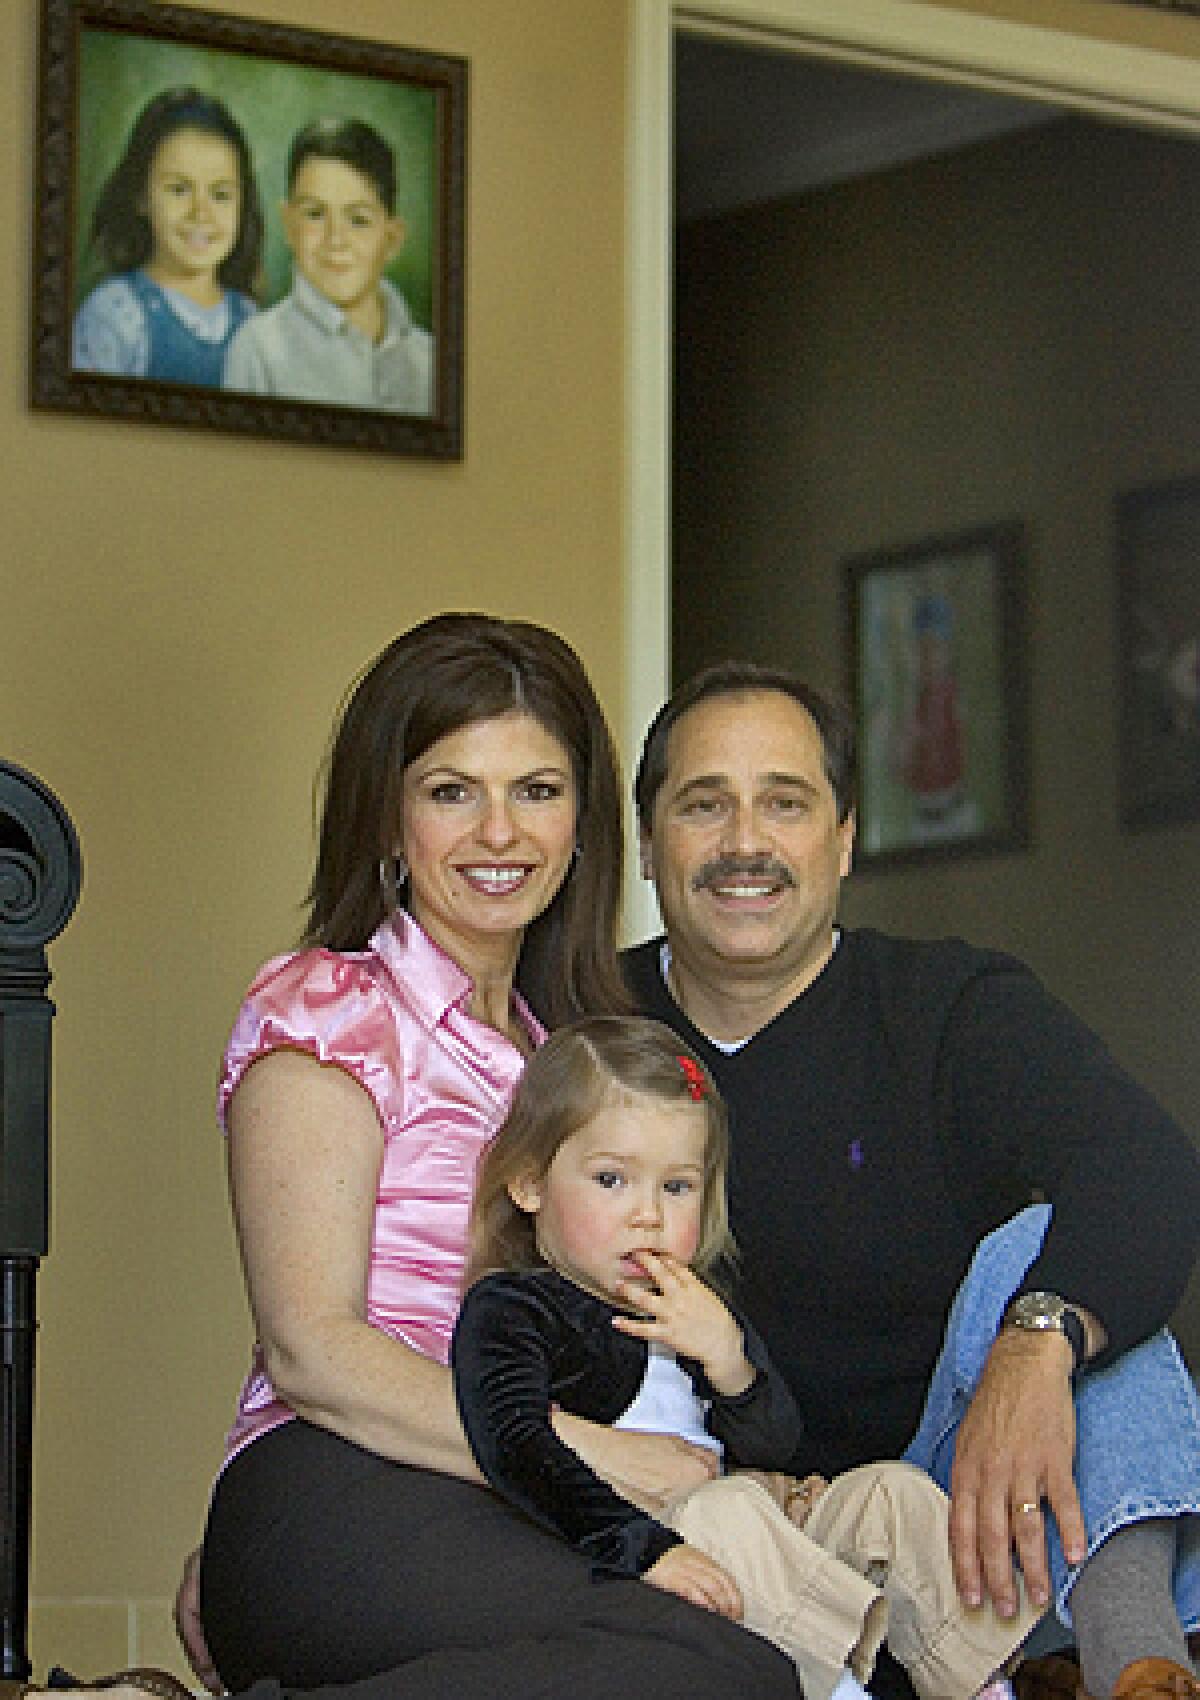 Bob and Carmen Pack play with their two-year-old daughter Noelle, in front of a painting of the couple's deceased children Troy and Alana, April 25, 2008 in Danville, California. They were killed nearly five years ago when a woman, under the influence of prescription drugs and alcohol hit them with her car while they were walking with their mother.